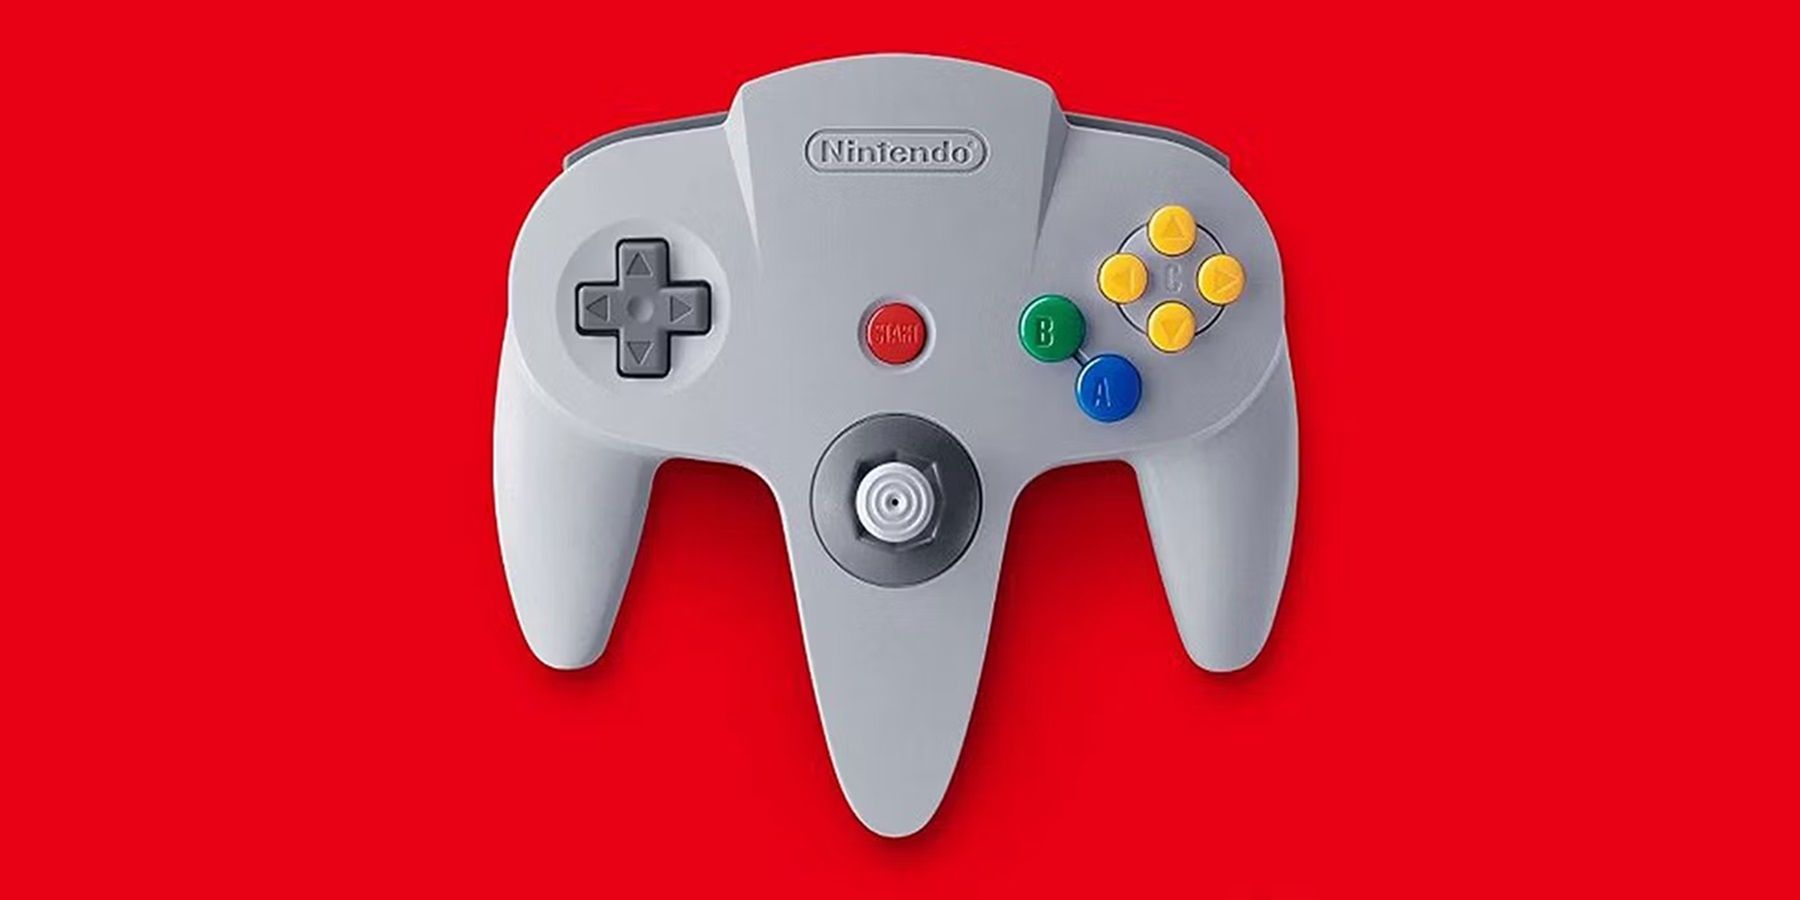 nintendo 64 controller red background